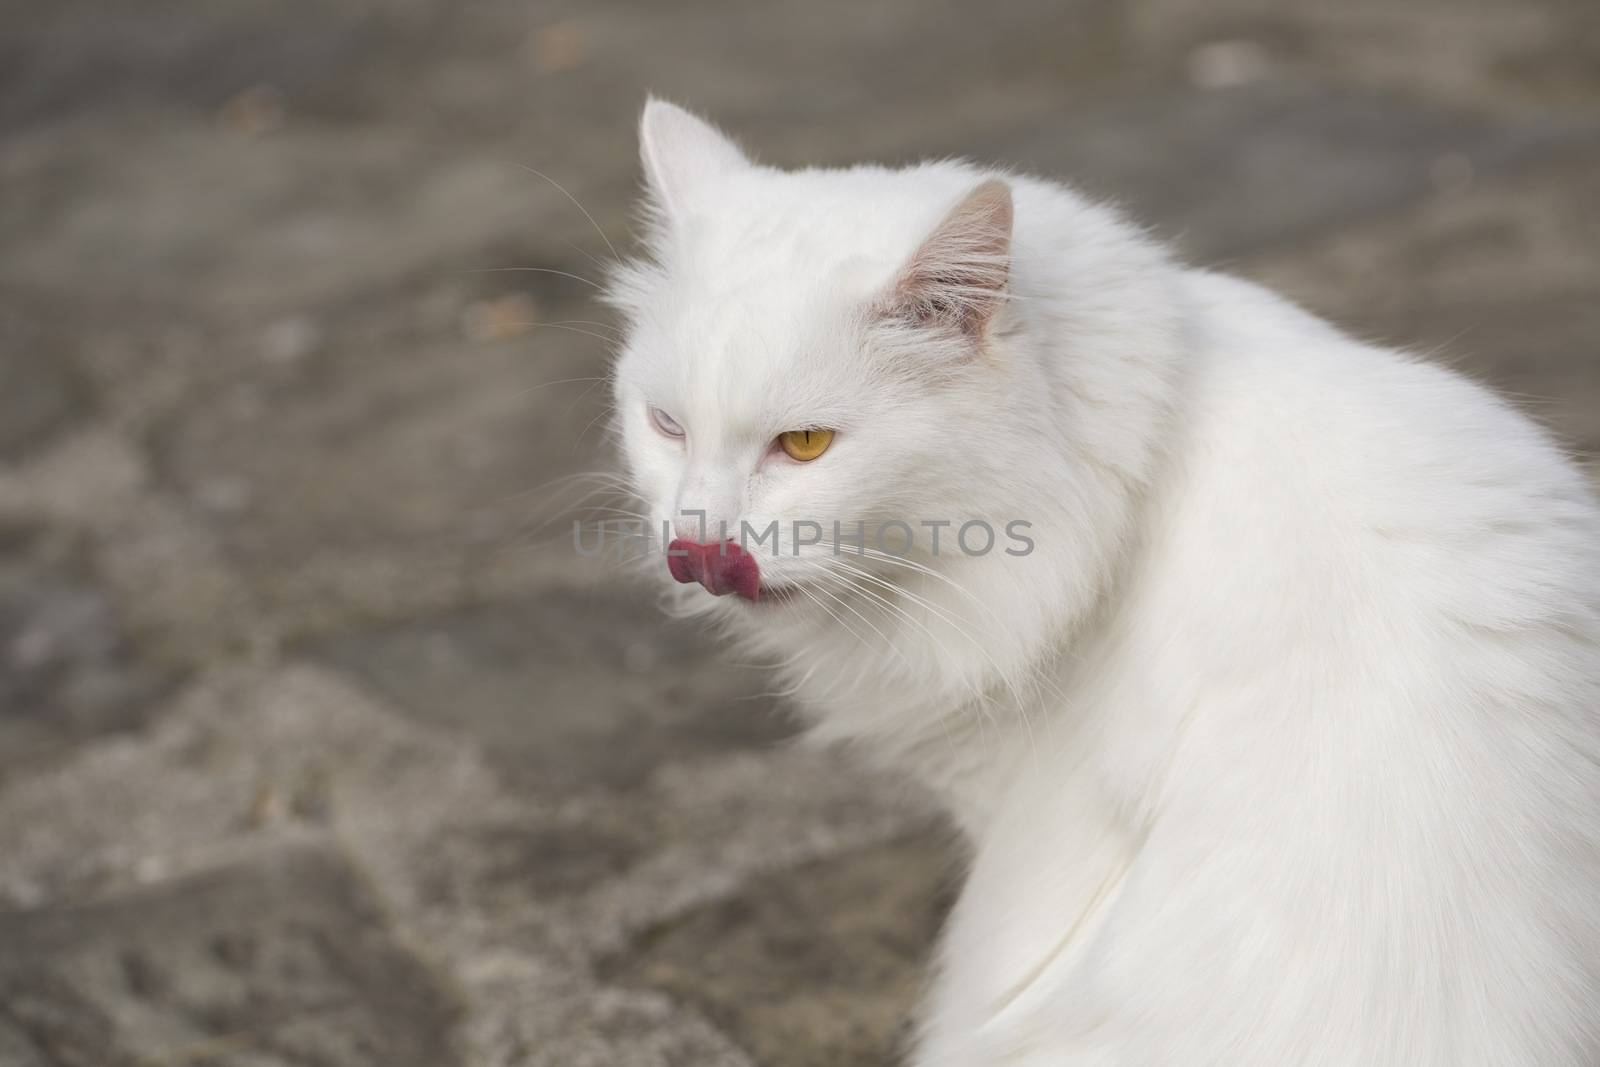 Portrait of a white persian cat with different color eyes.